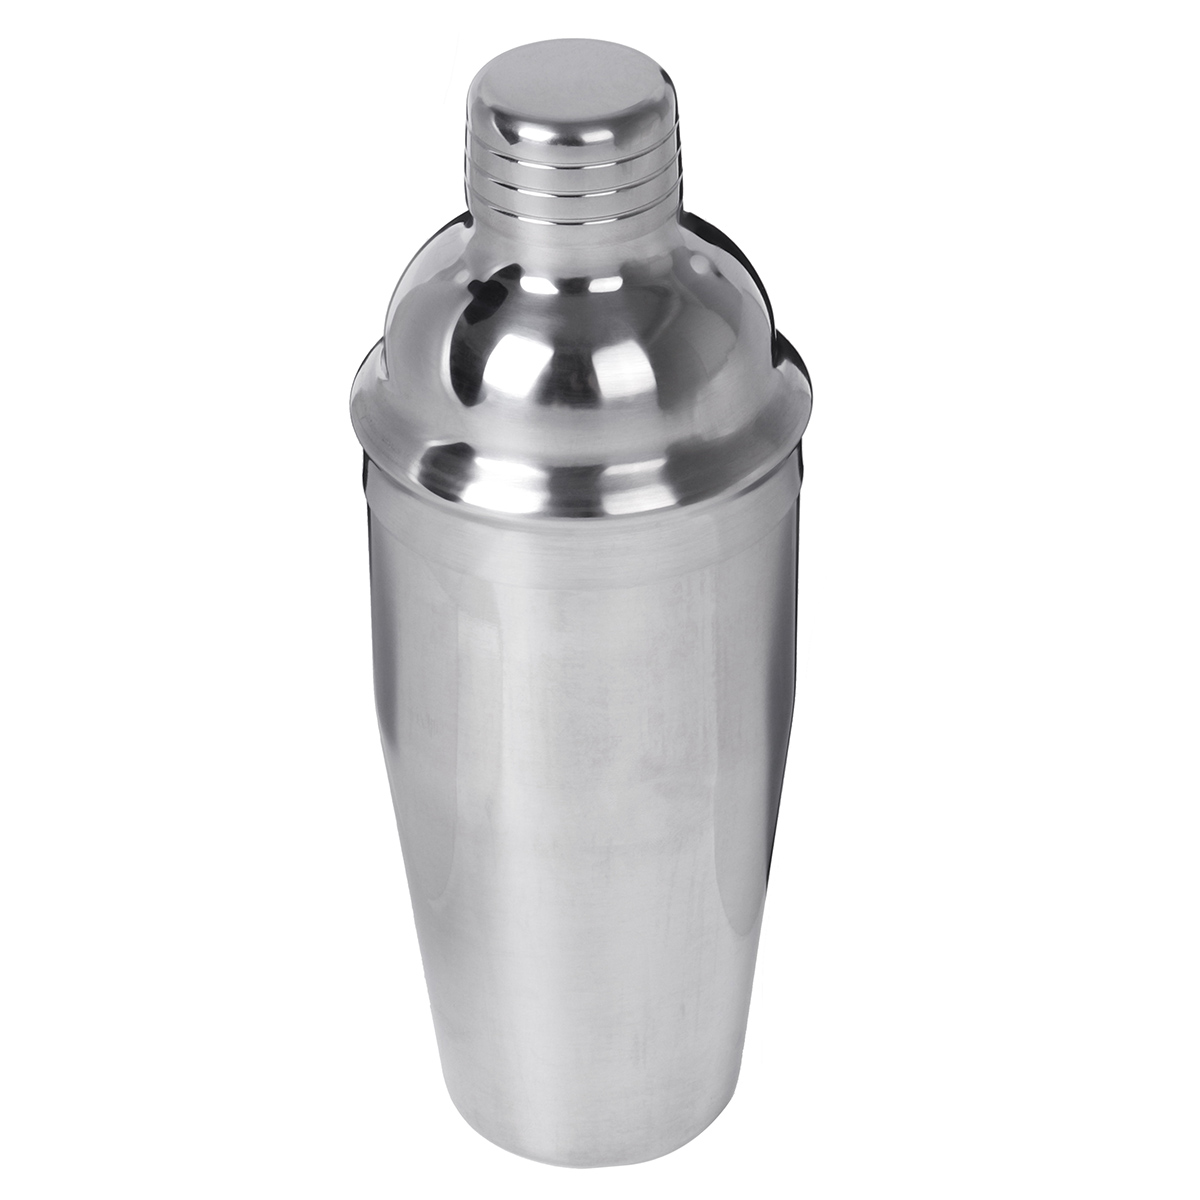 20PCS-750ml-Stainless-Steel-Cocktail-Shaker-Cocktail-Shaker-Drink-Set-Cocktail-Shaker-1719706-5